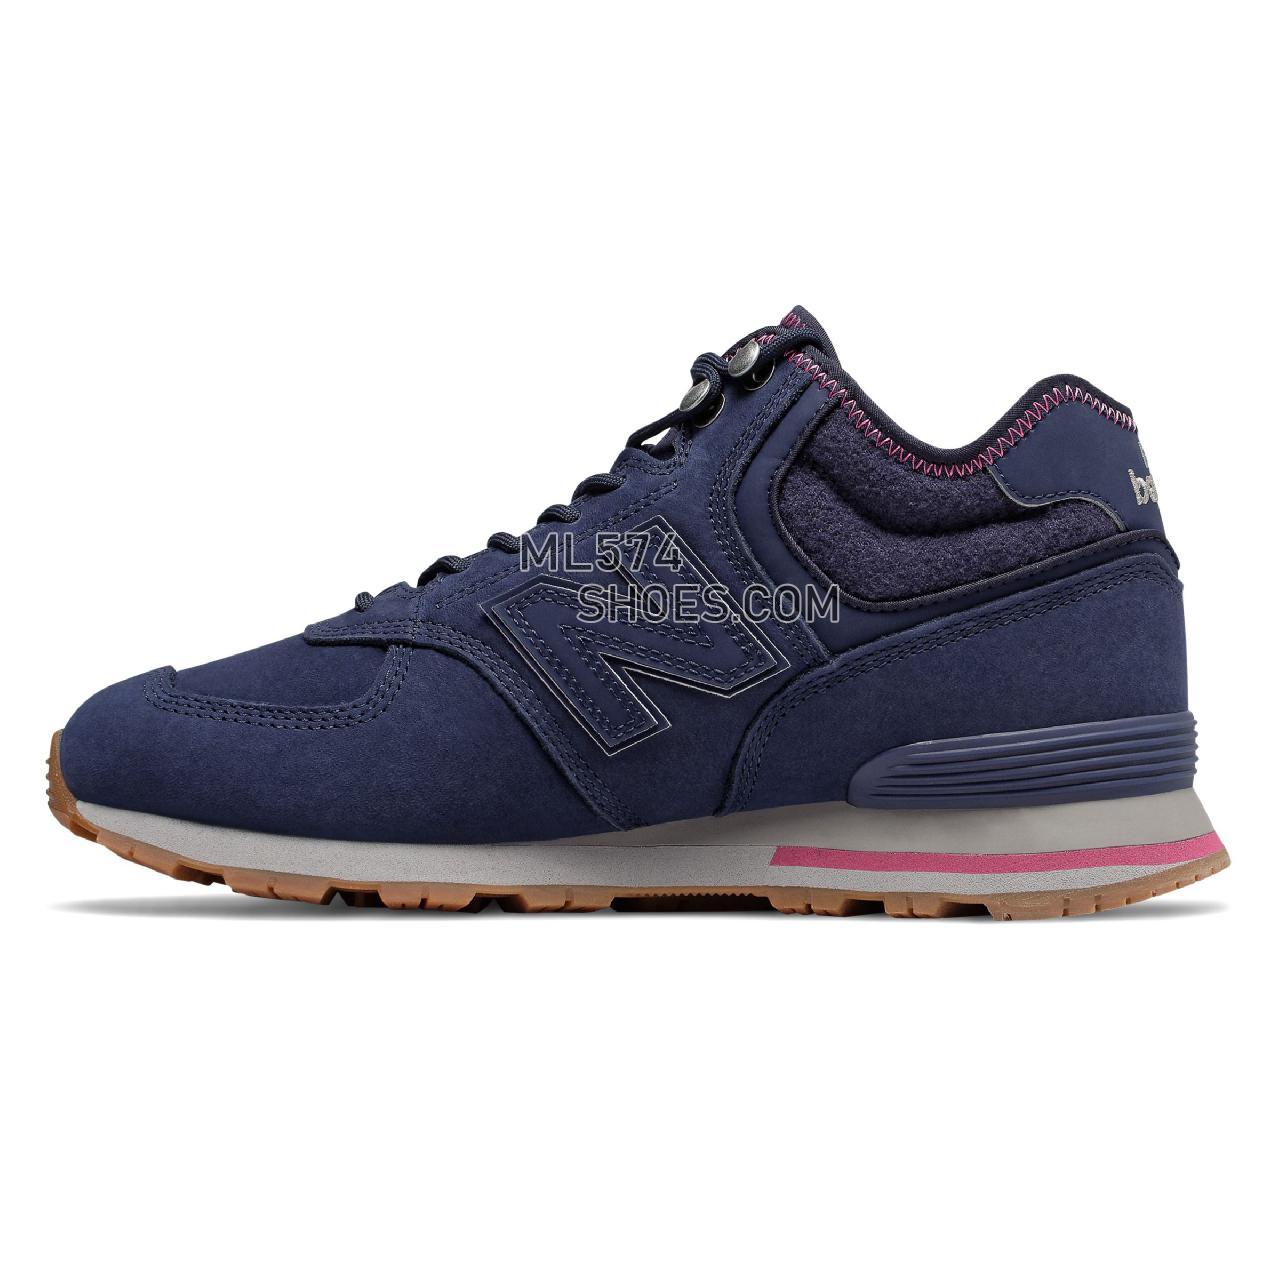 New Balance 574 Mid - Men's Classic Sneakers - Pigment with Dragon Fruit - MH574RDE